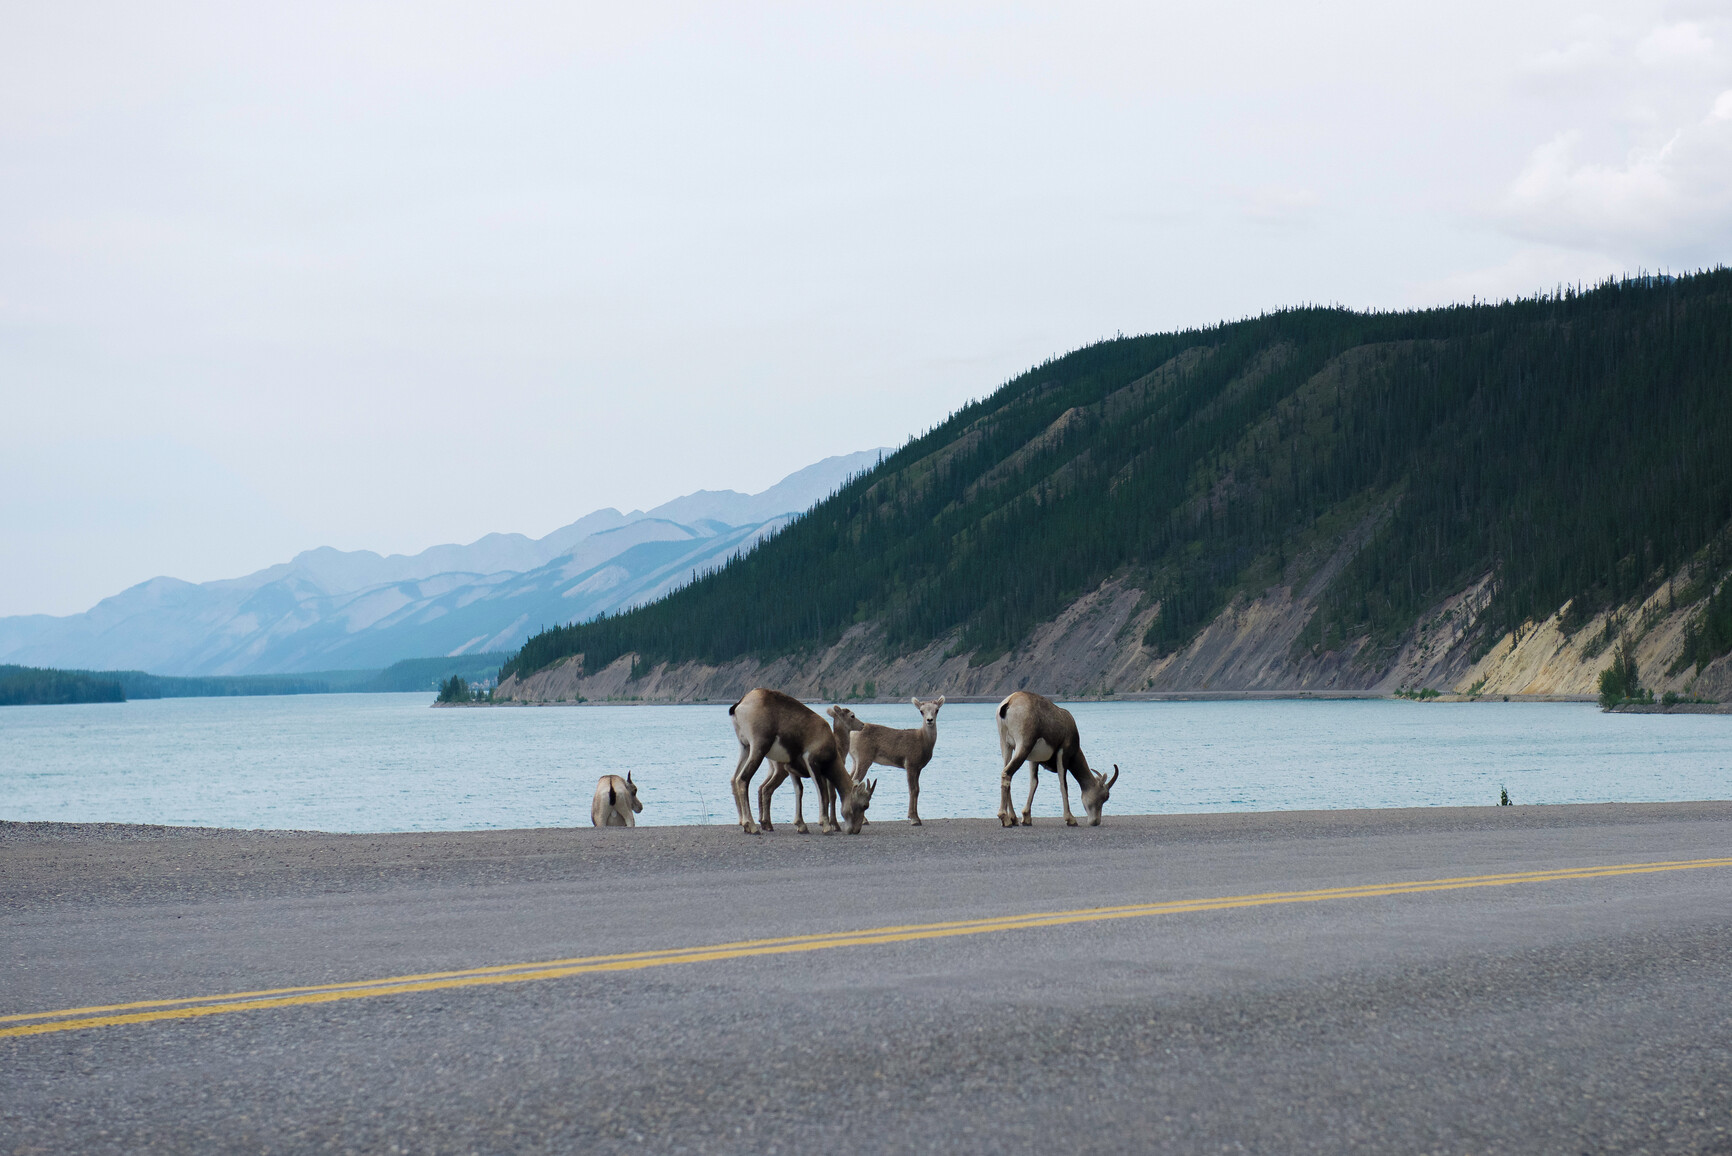 A group of female and young Stone Sheep (Ovis dalli) on the side of the road. Muncho Lake and forested mountains in the background. Muncho Lake Park.